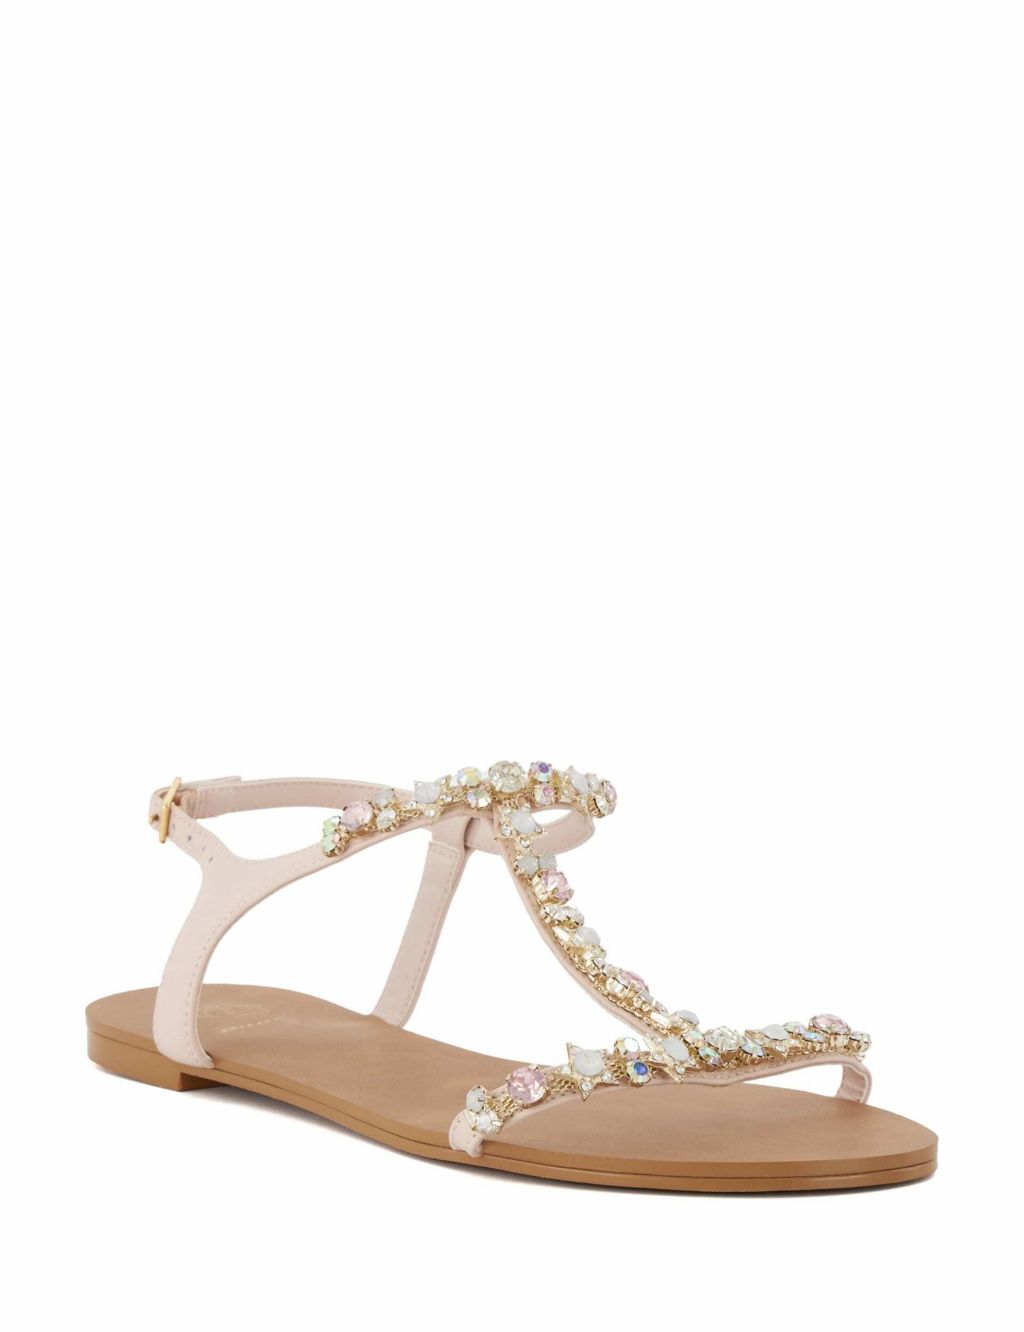 Jewelled Strappy Flat Sandals | Dune London | M&S